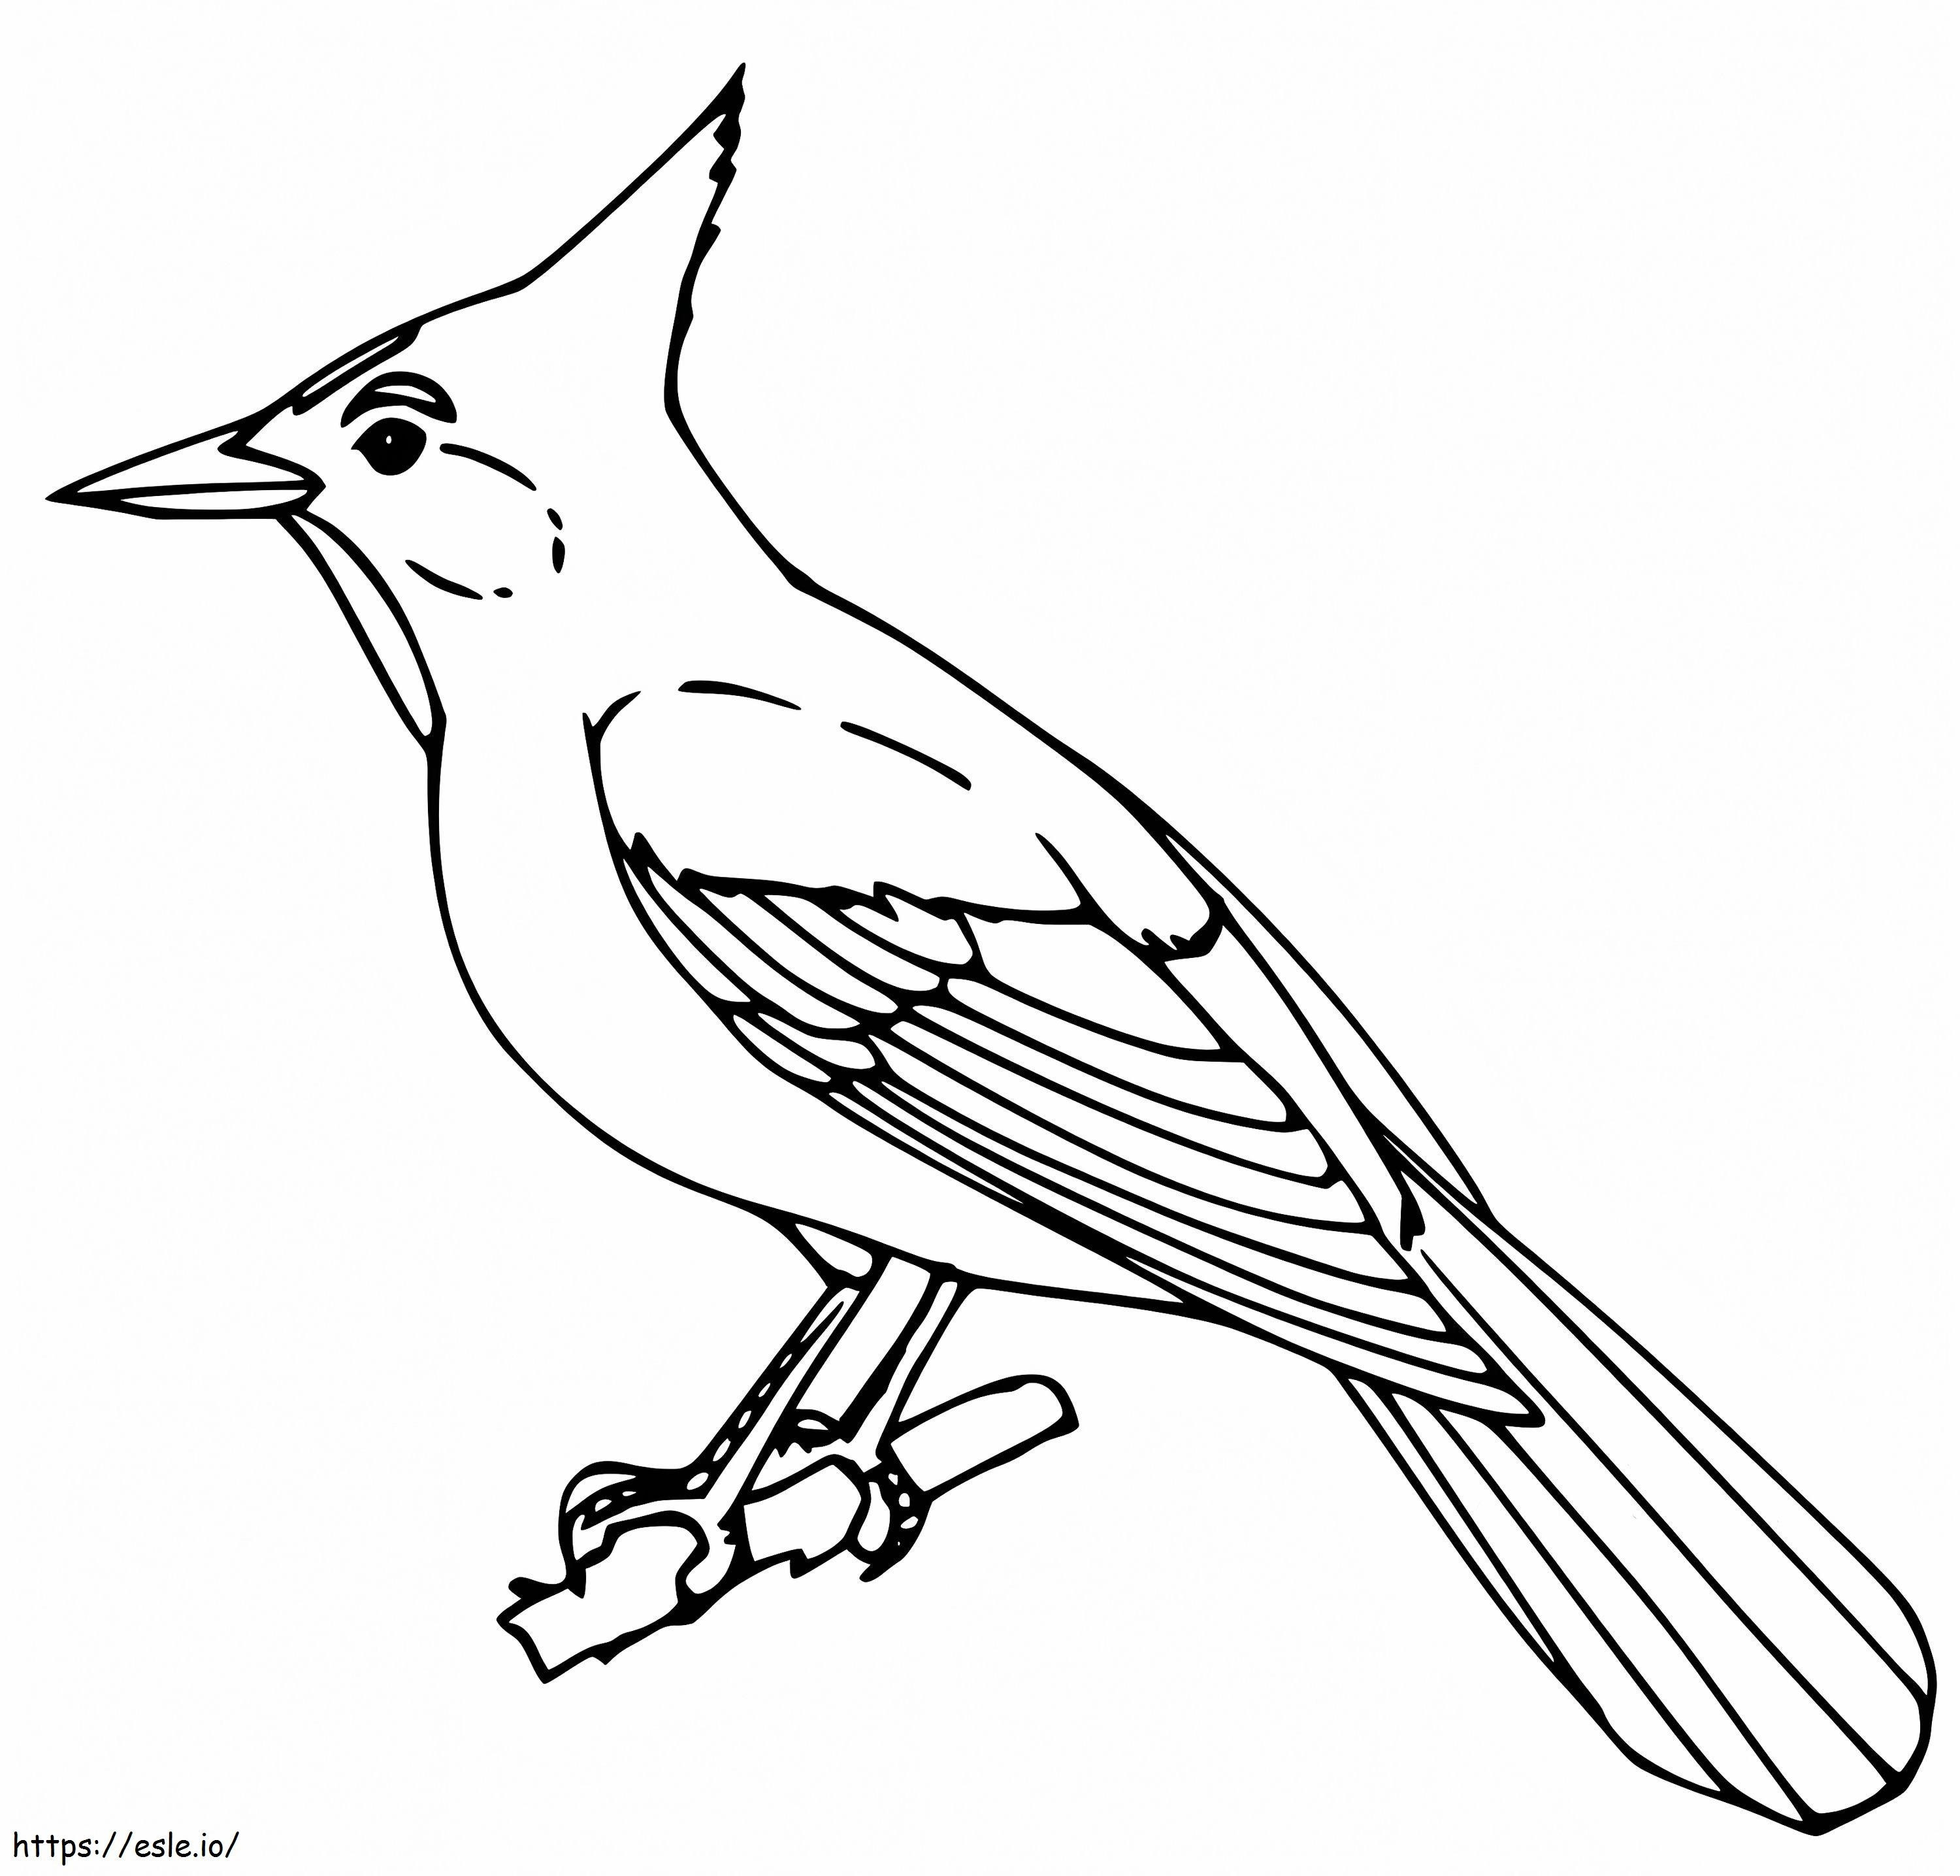 Blue Jay 1 coloring page